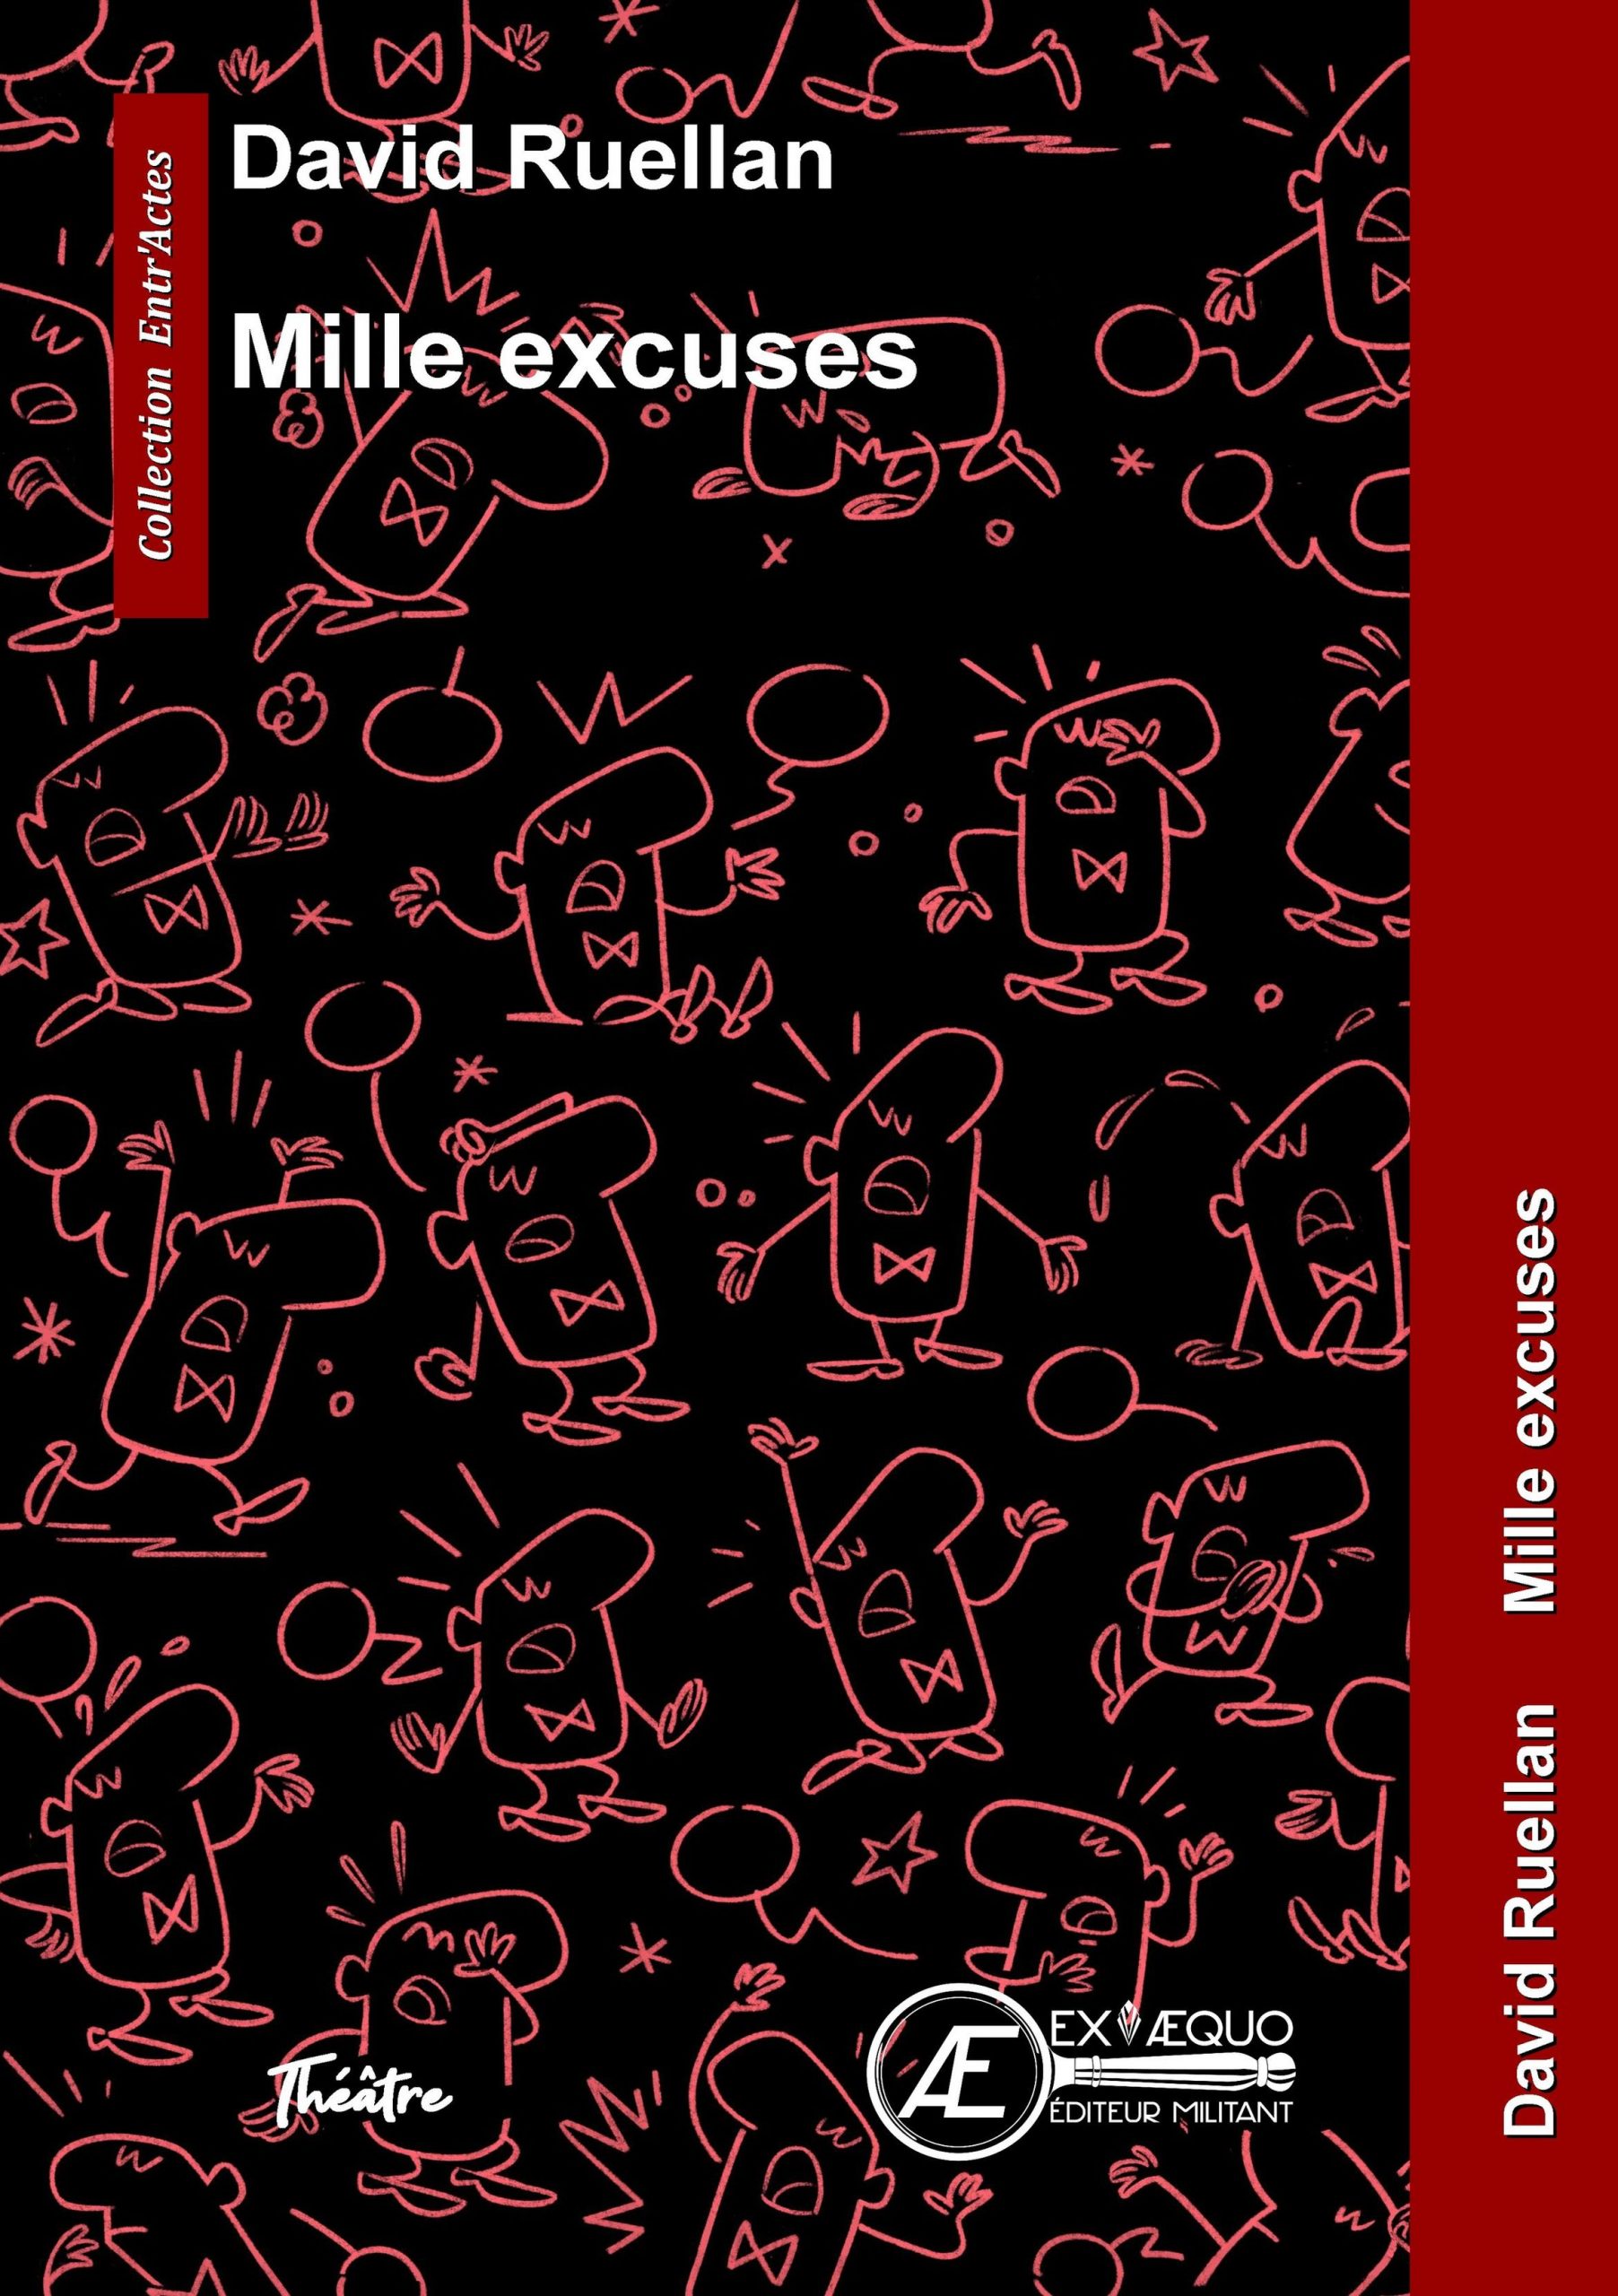 You are currently viewing Mille excuses